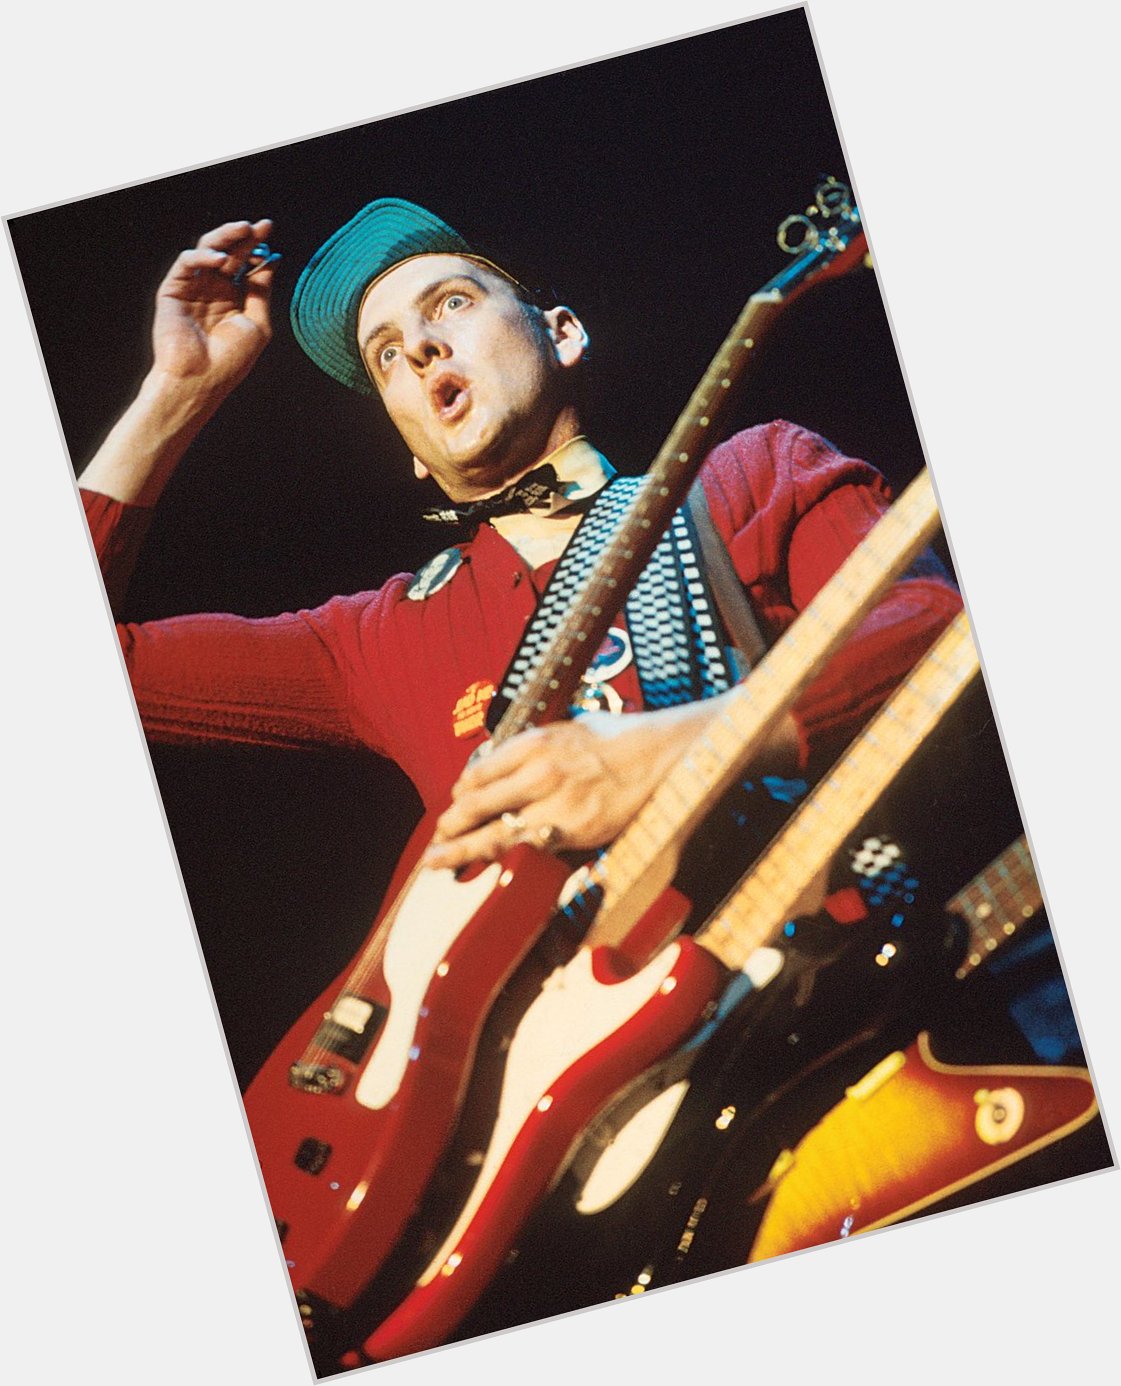 Happy 73rd birthday to the great Rick Nielsen, who was born on this day in 1948.  